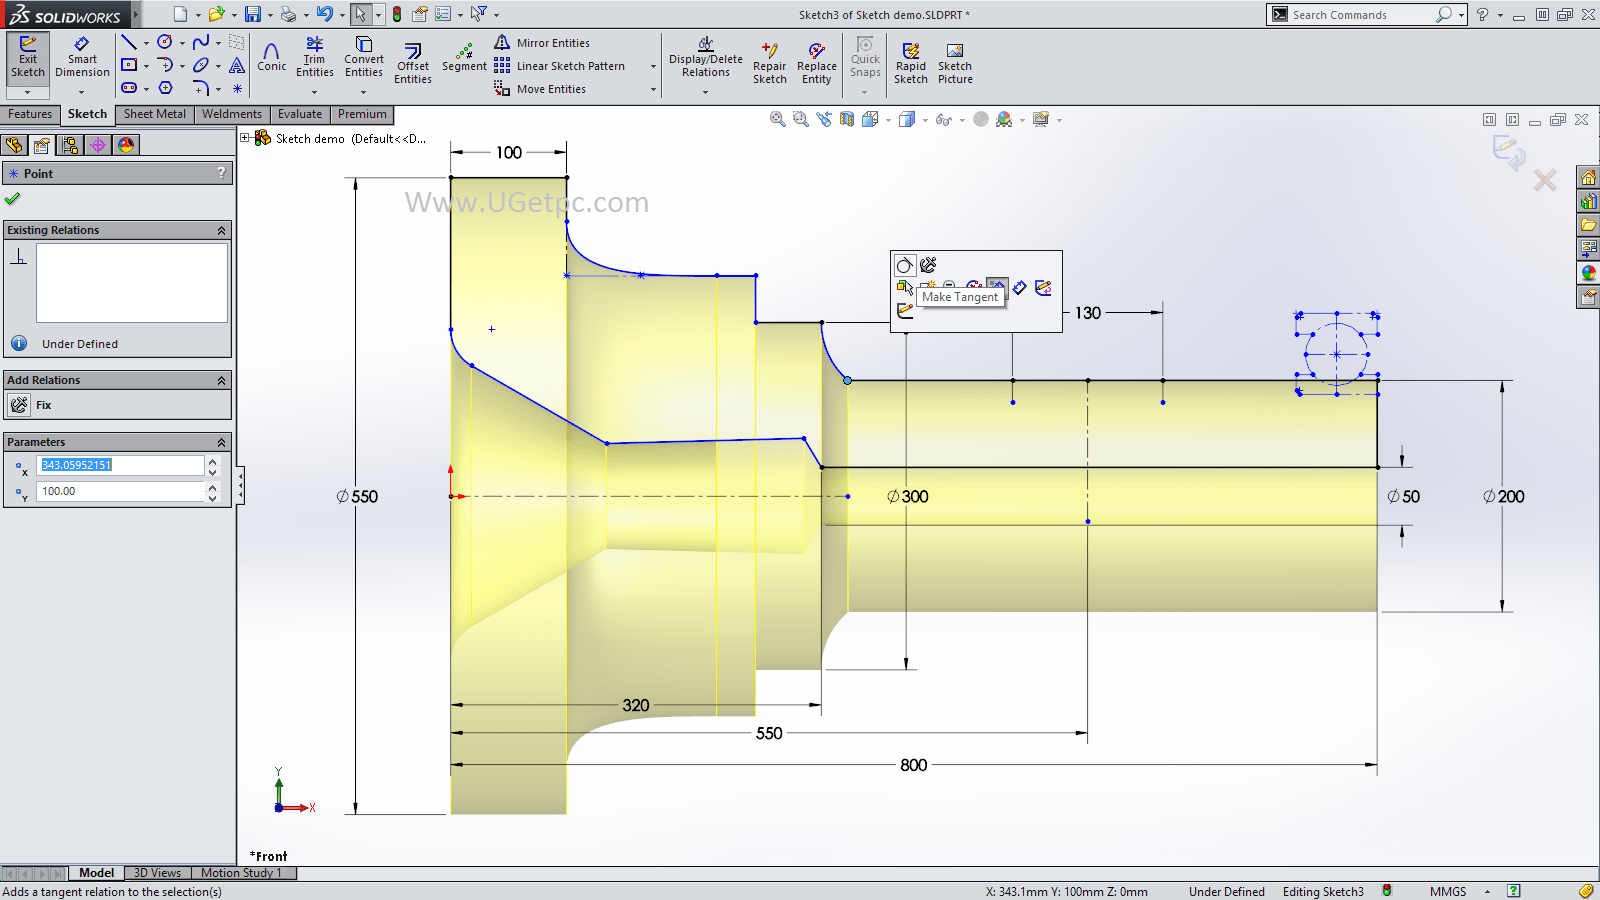 Solidworks 2014 With Crack 32 Bit